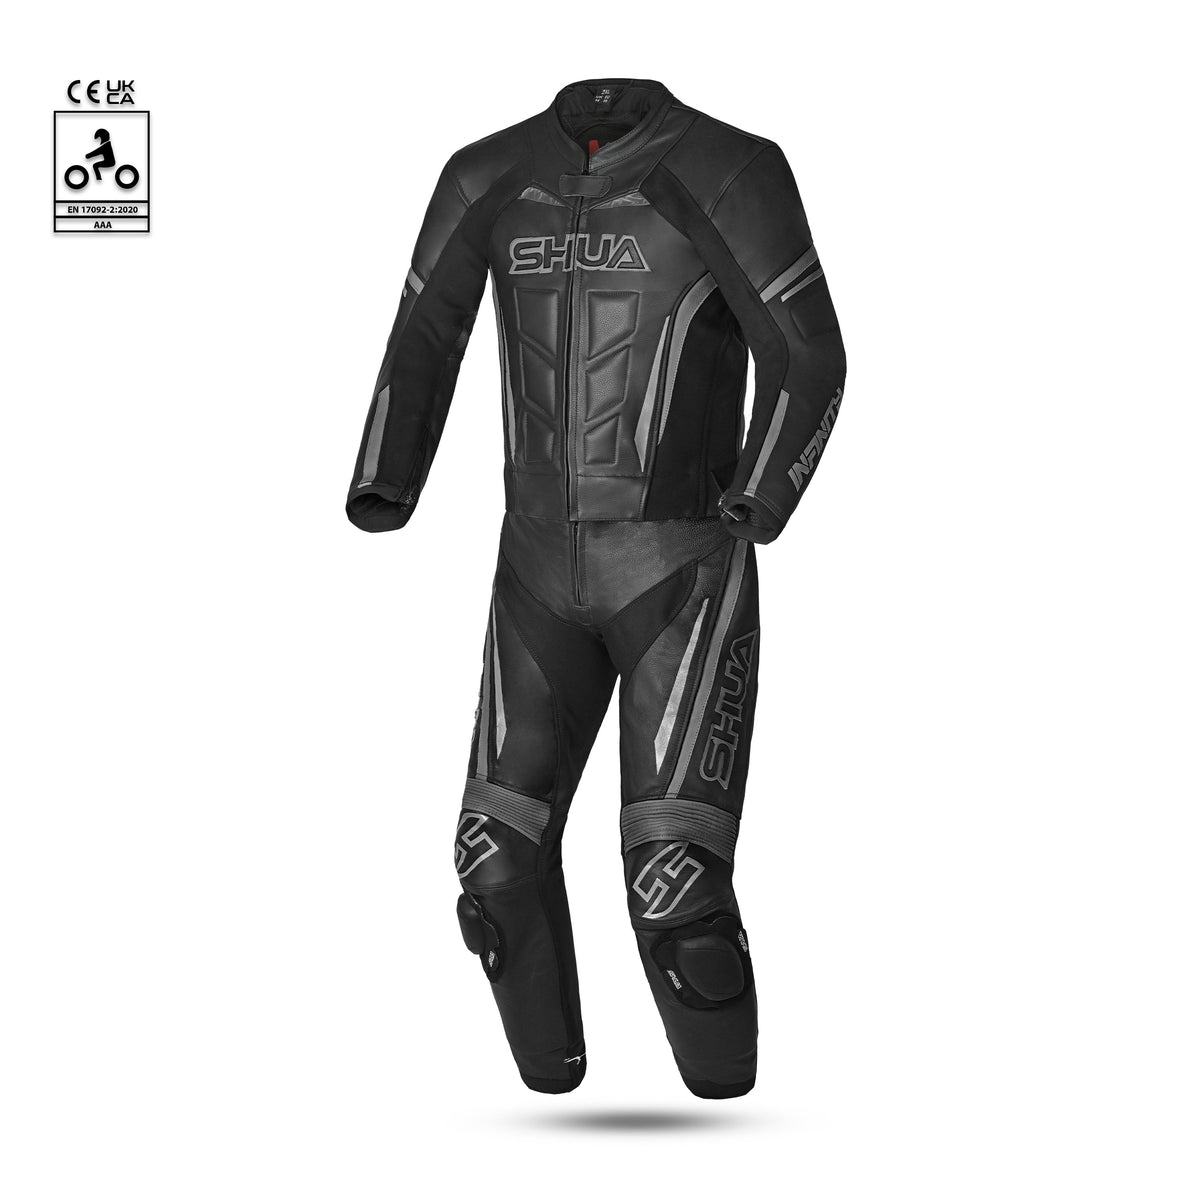 shua infinity 2 pc black and dark grey racing suit front side view